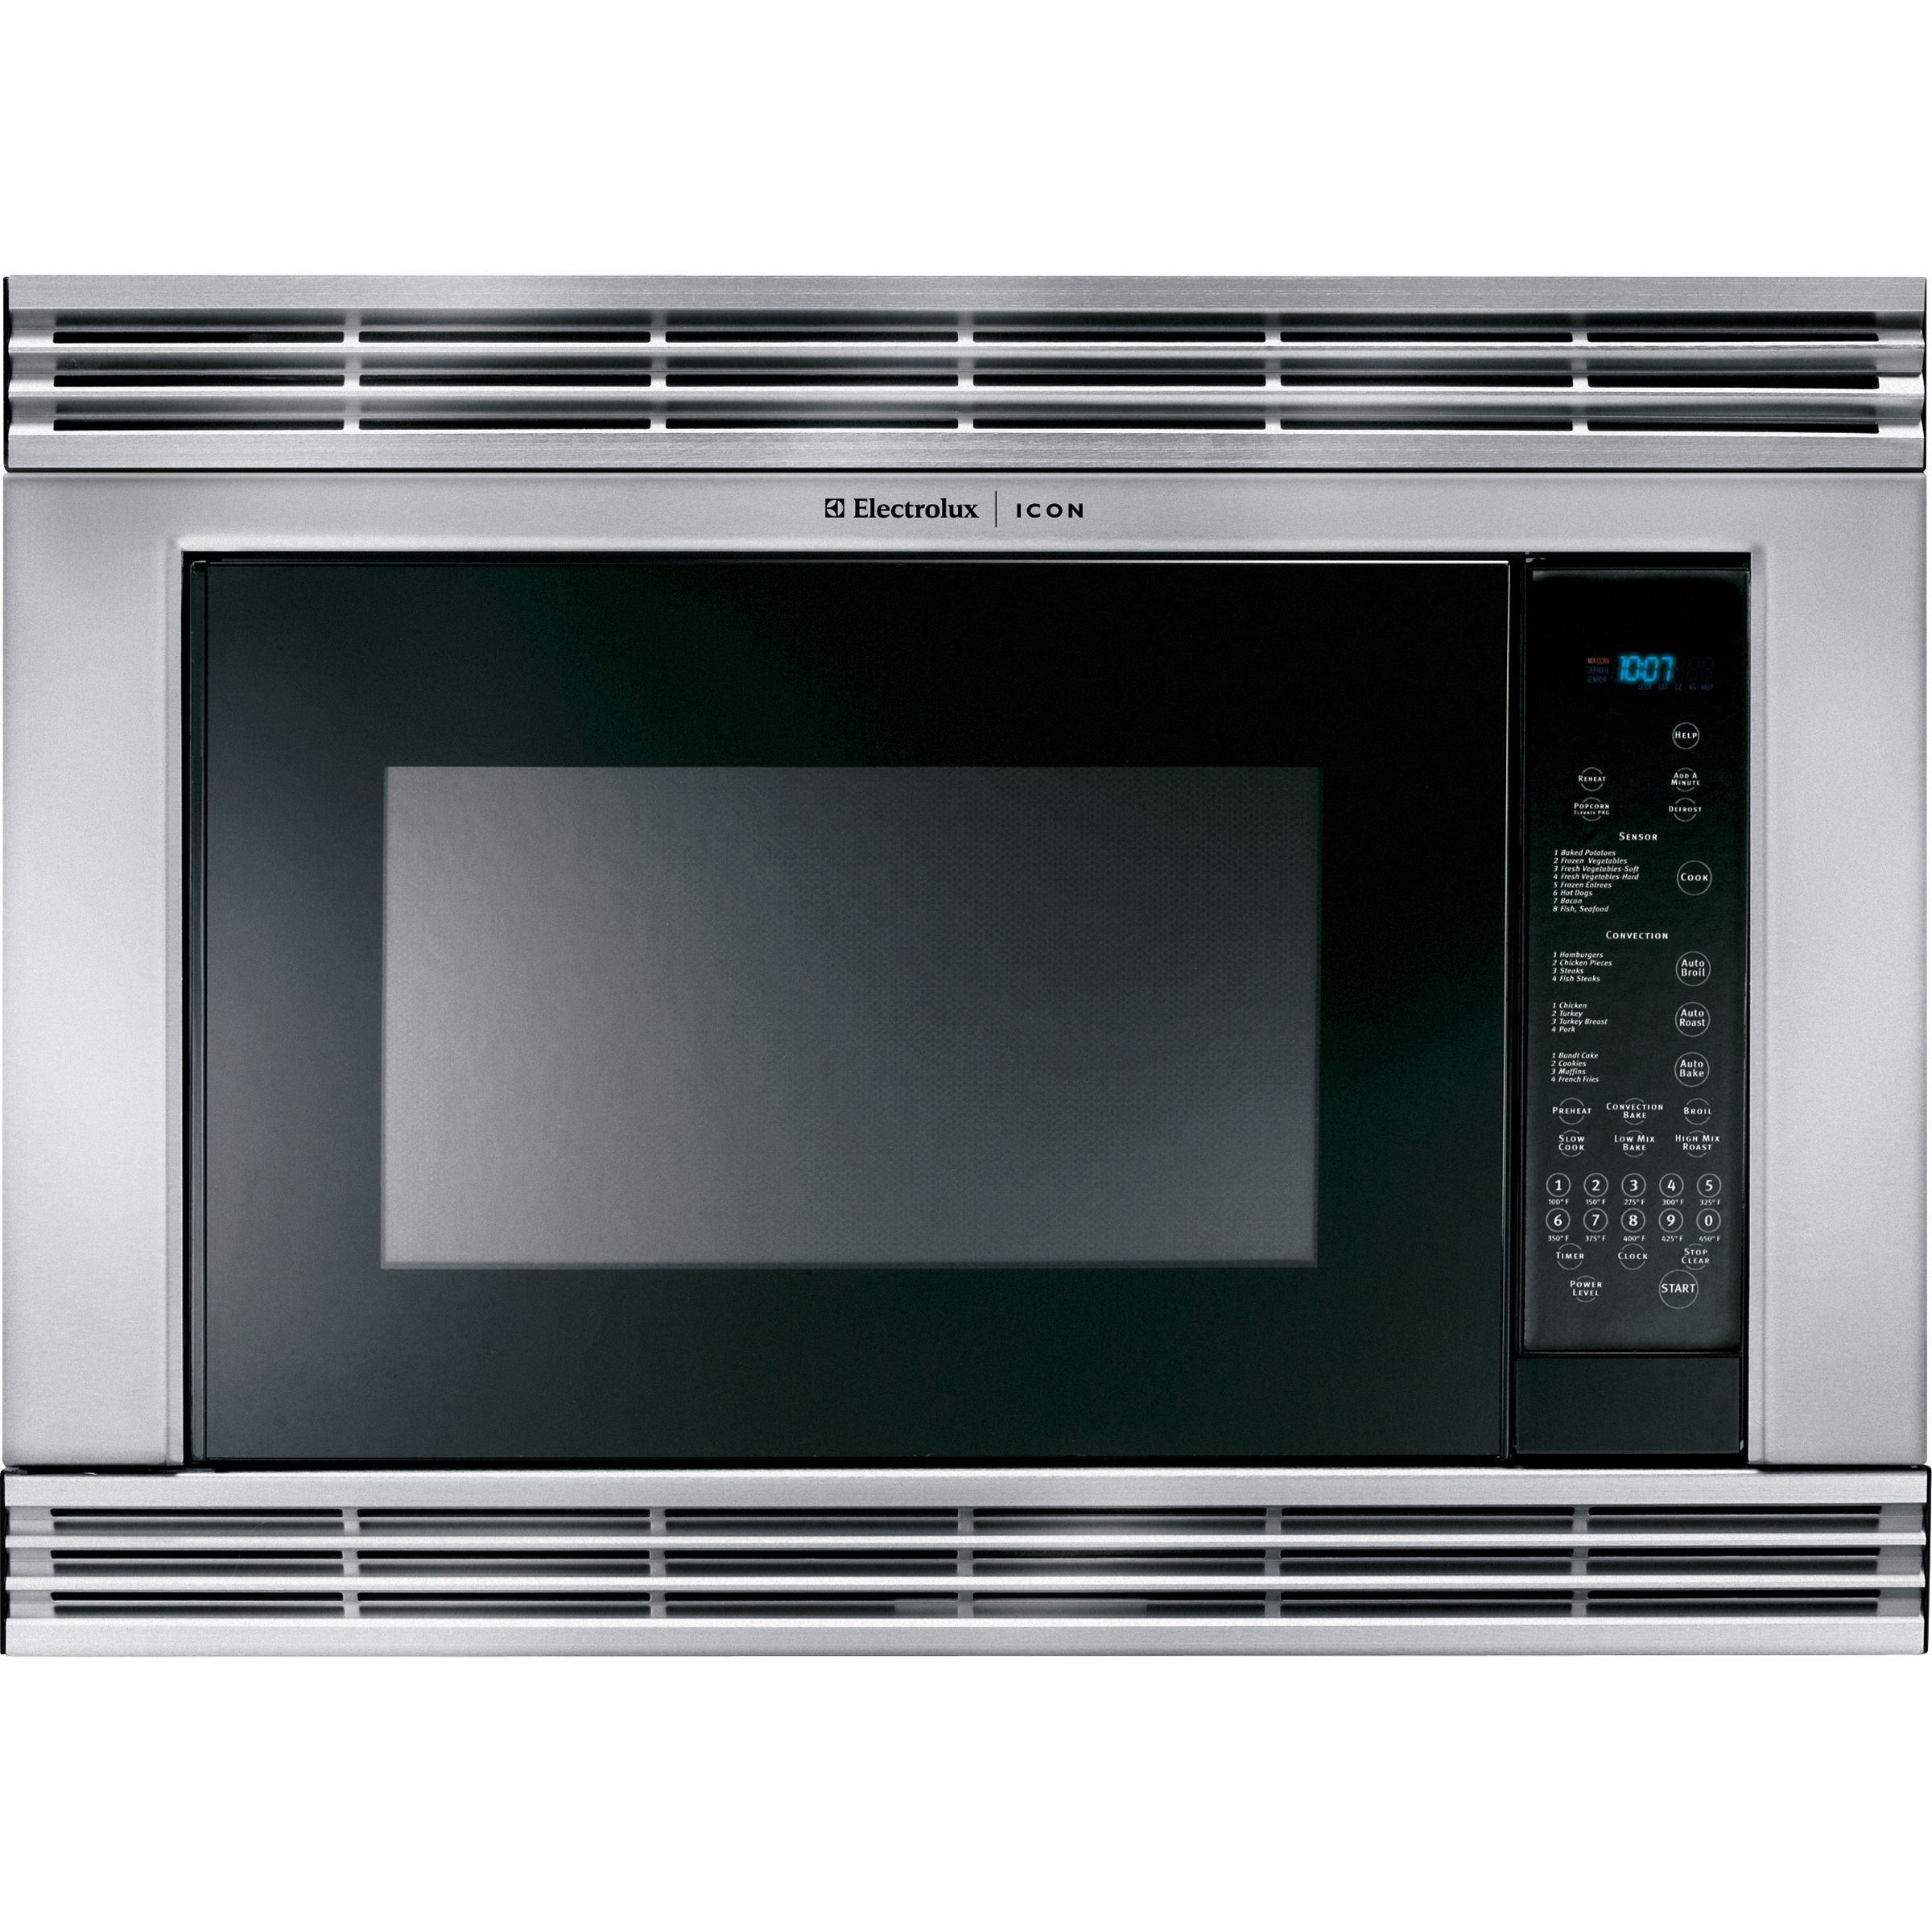 Electrolux ICON 30 1.5 cu. ft. Built-In Convection Microwave Oven - Stainless Steel